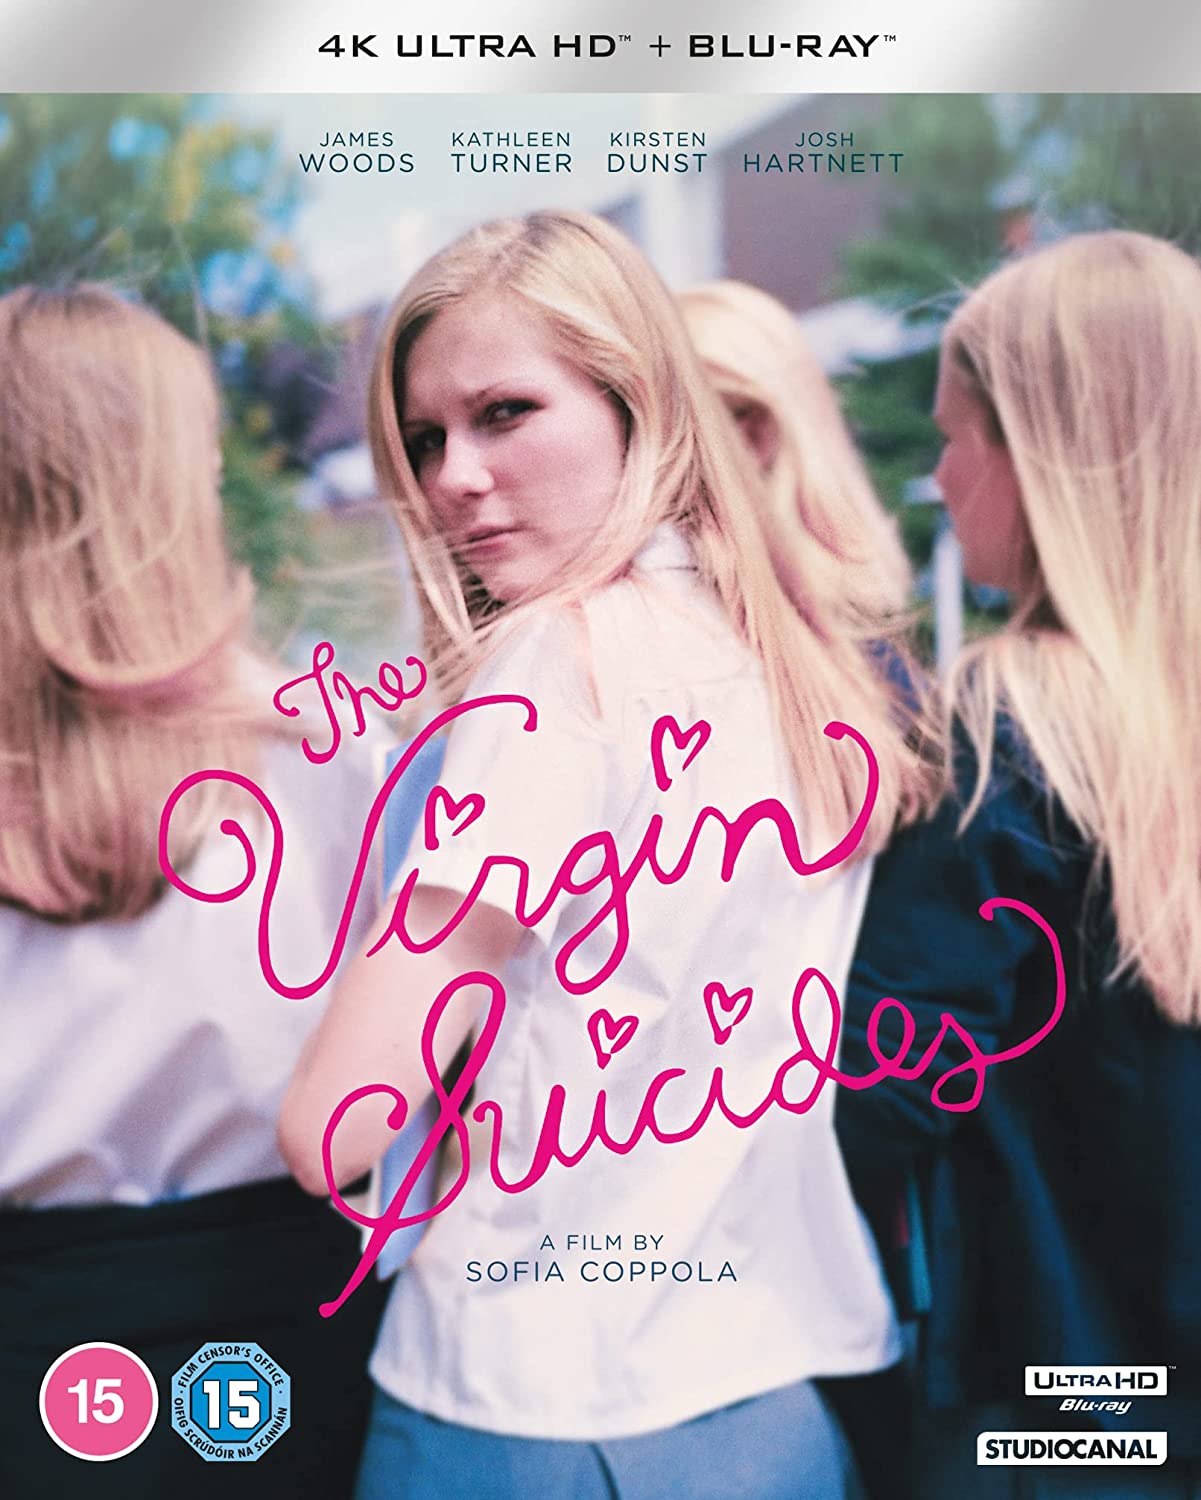 boom competitions -  win The Virgin Suicides on 4K UHD